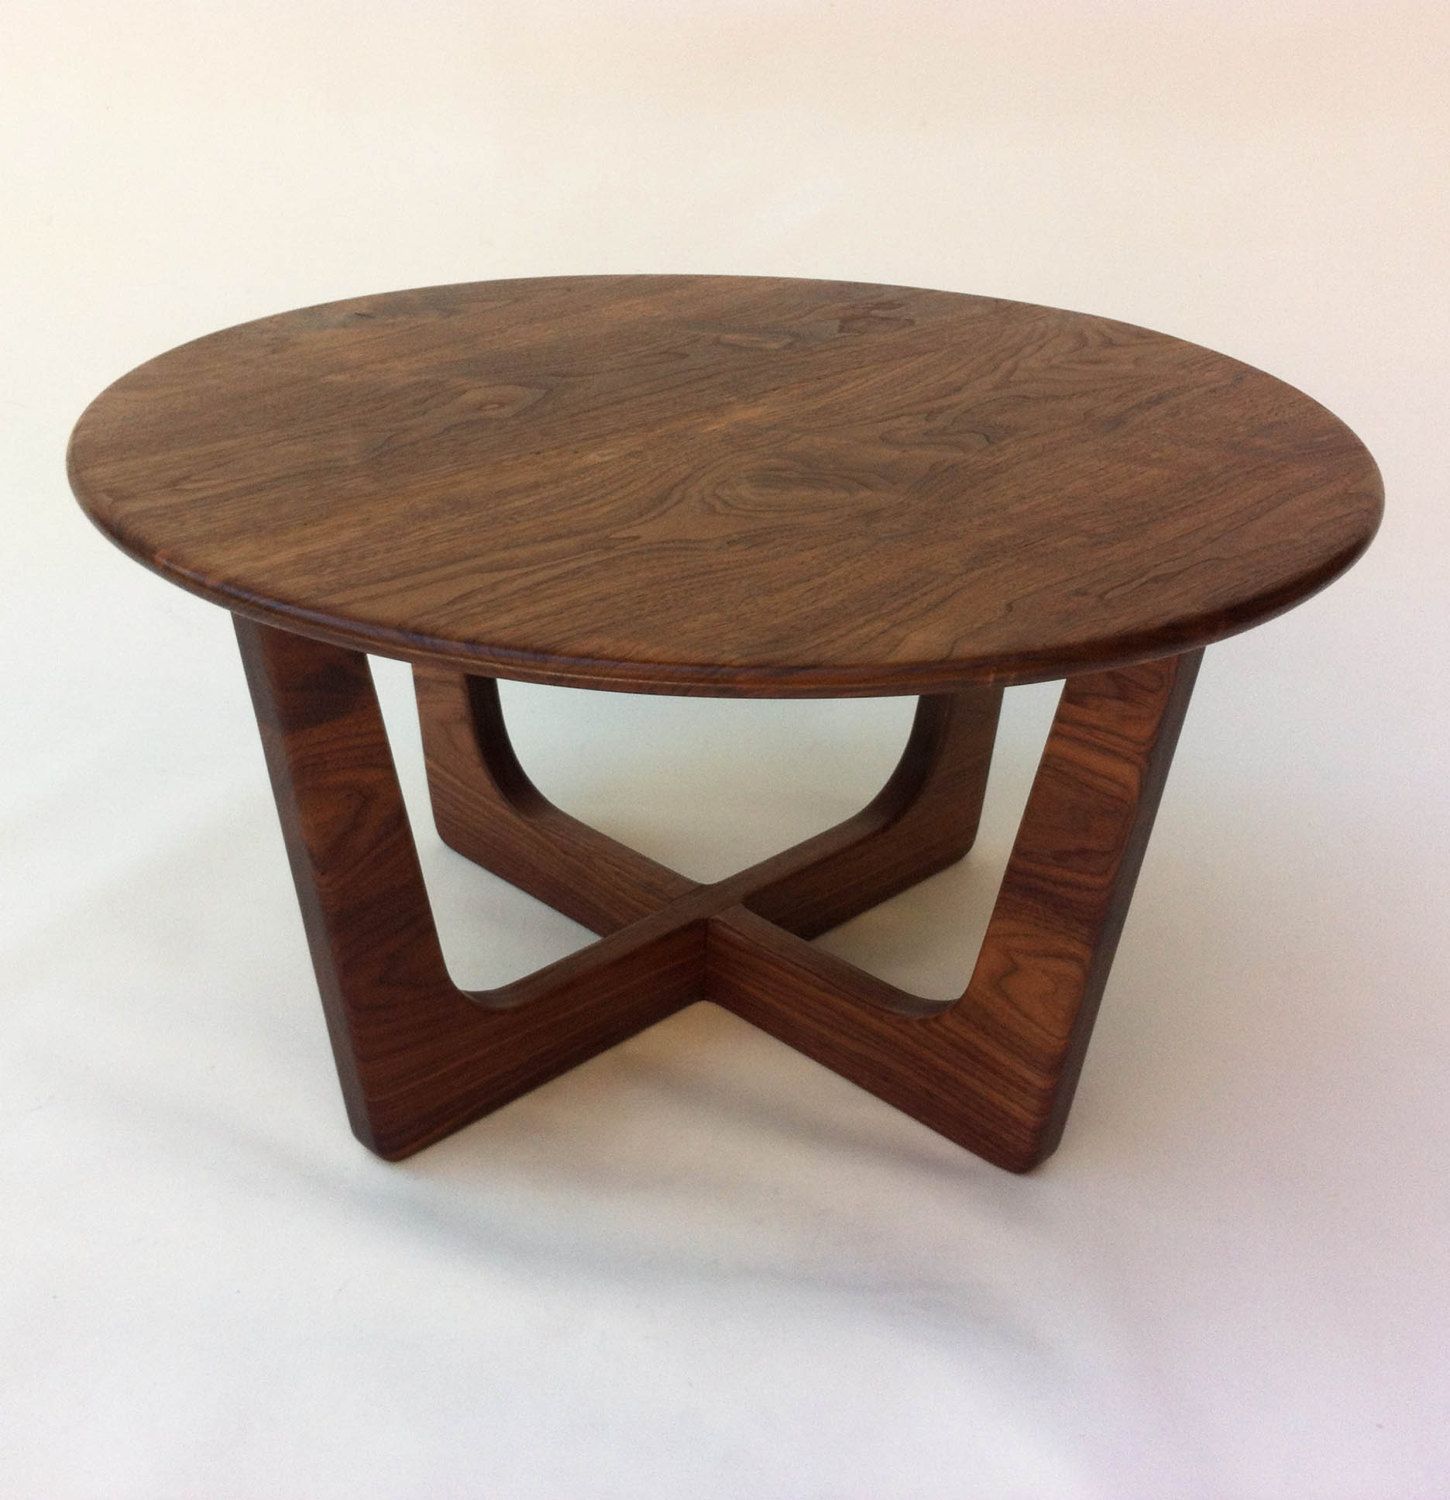 Solid Walnut Round Mid Century Modern Coffee Table With Walnut Coffee Tables (View 10 of 15)